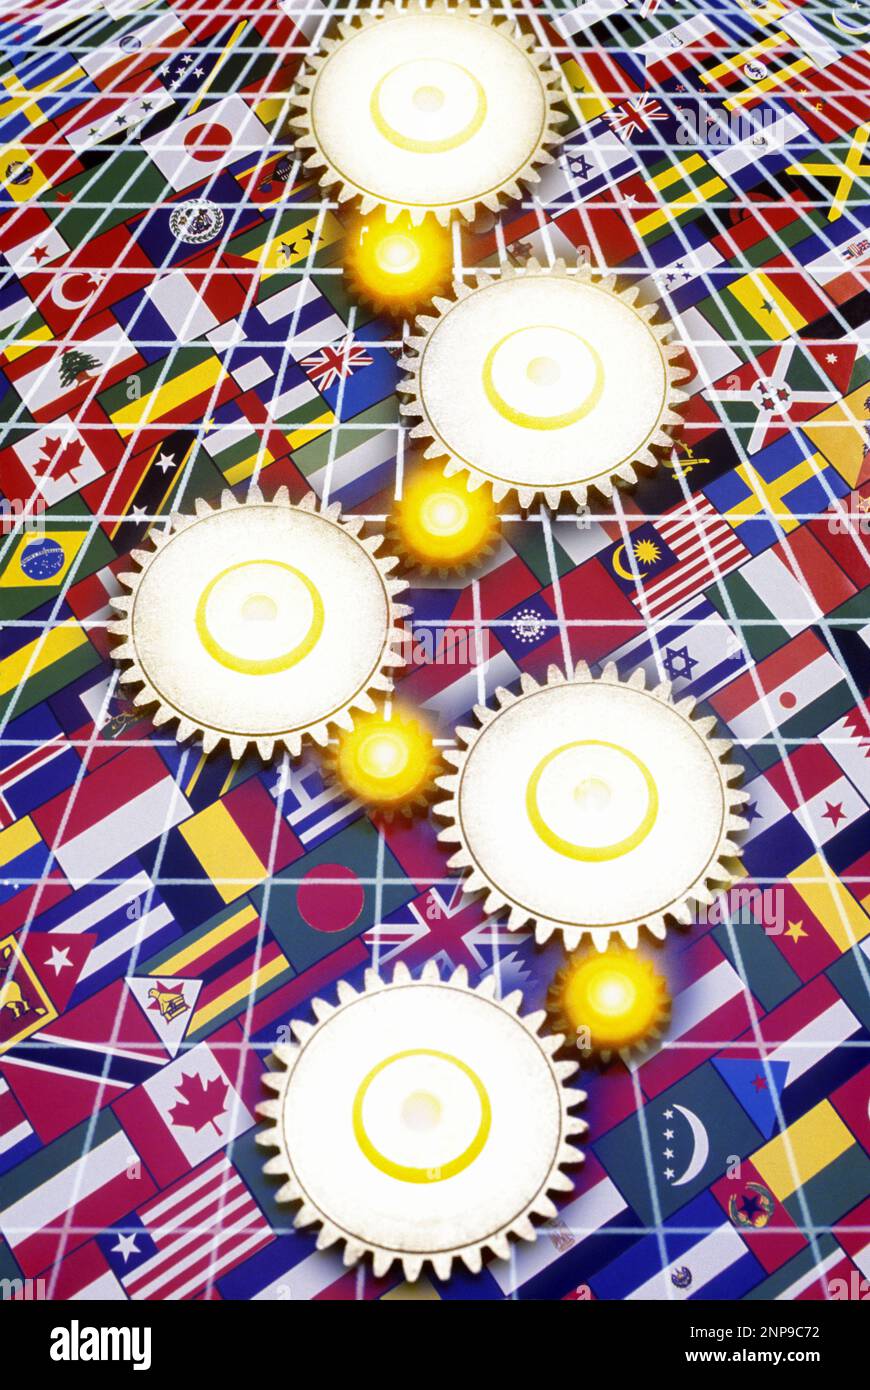 INTERLOCKING COG GEARS OVER NATIONAL FLAGS Stock Photo